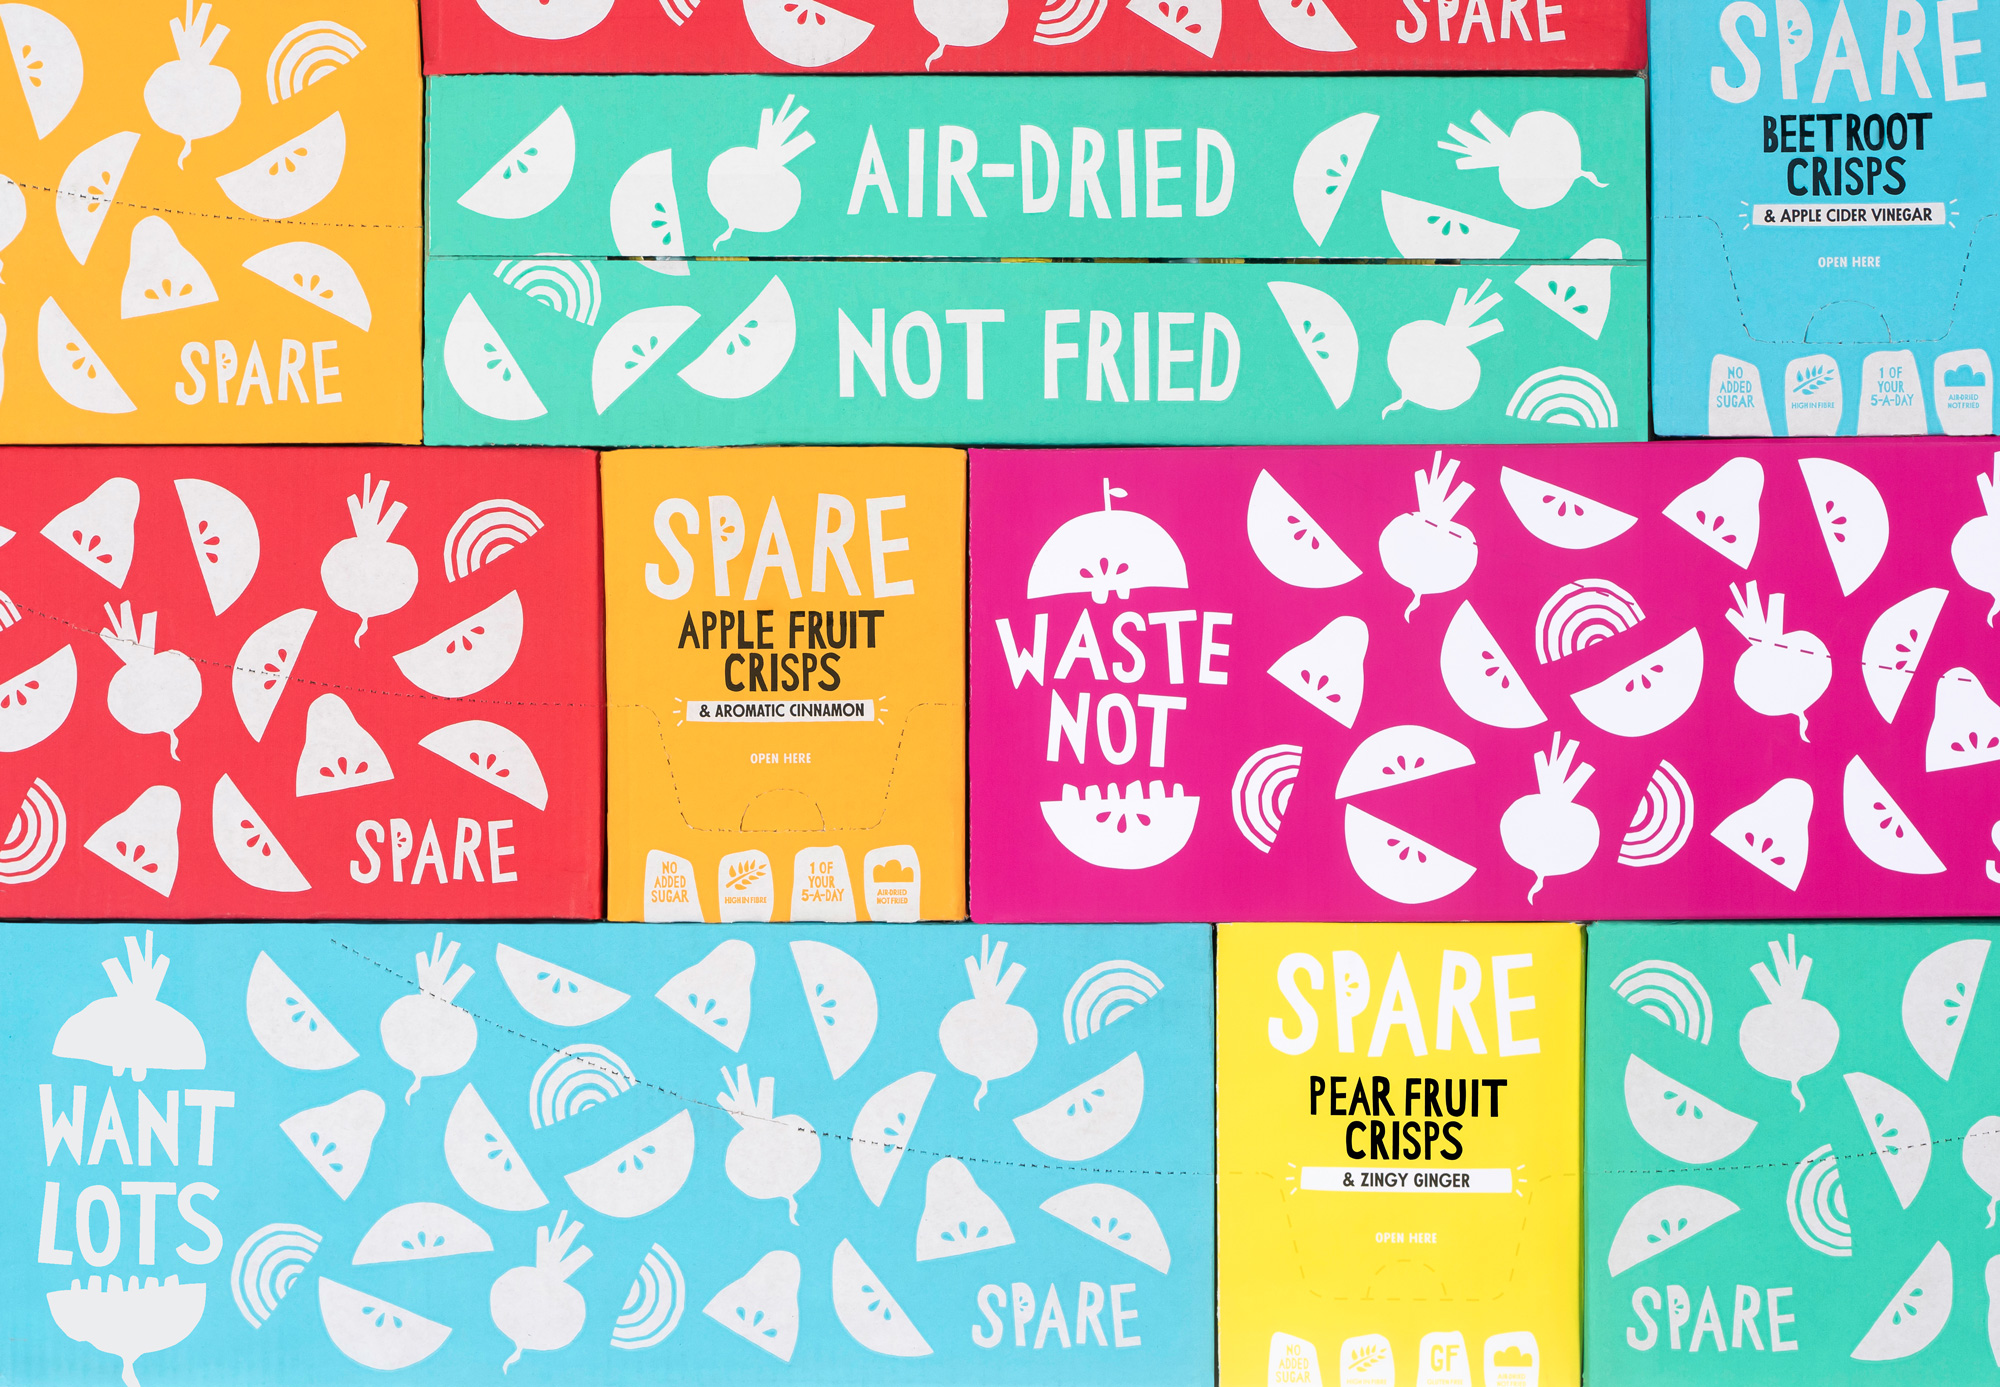 Brand New New Logo And Packaging For Spare Snacks By The